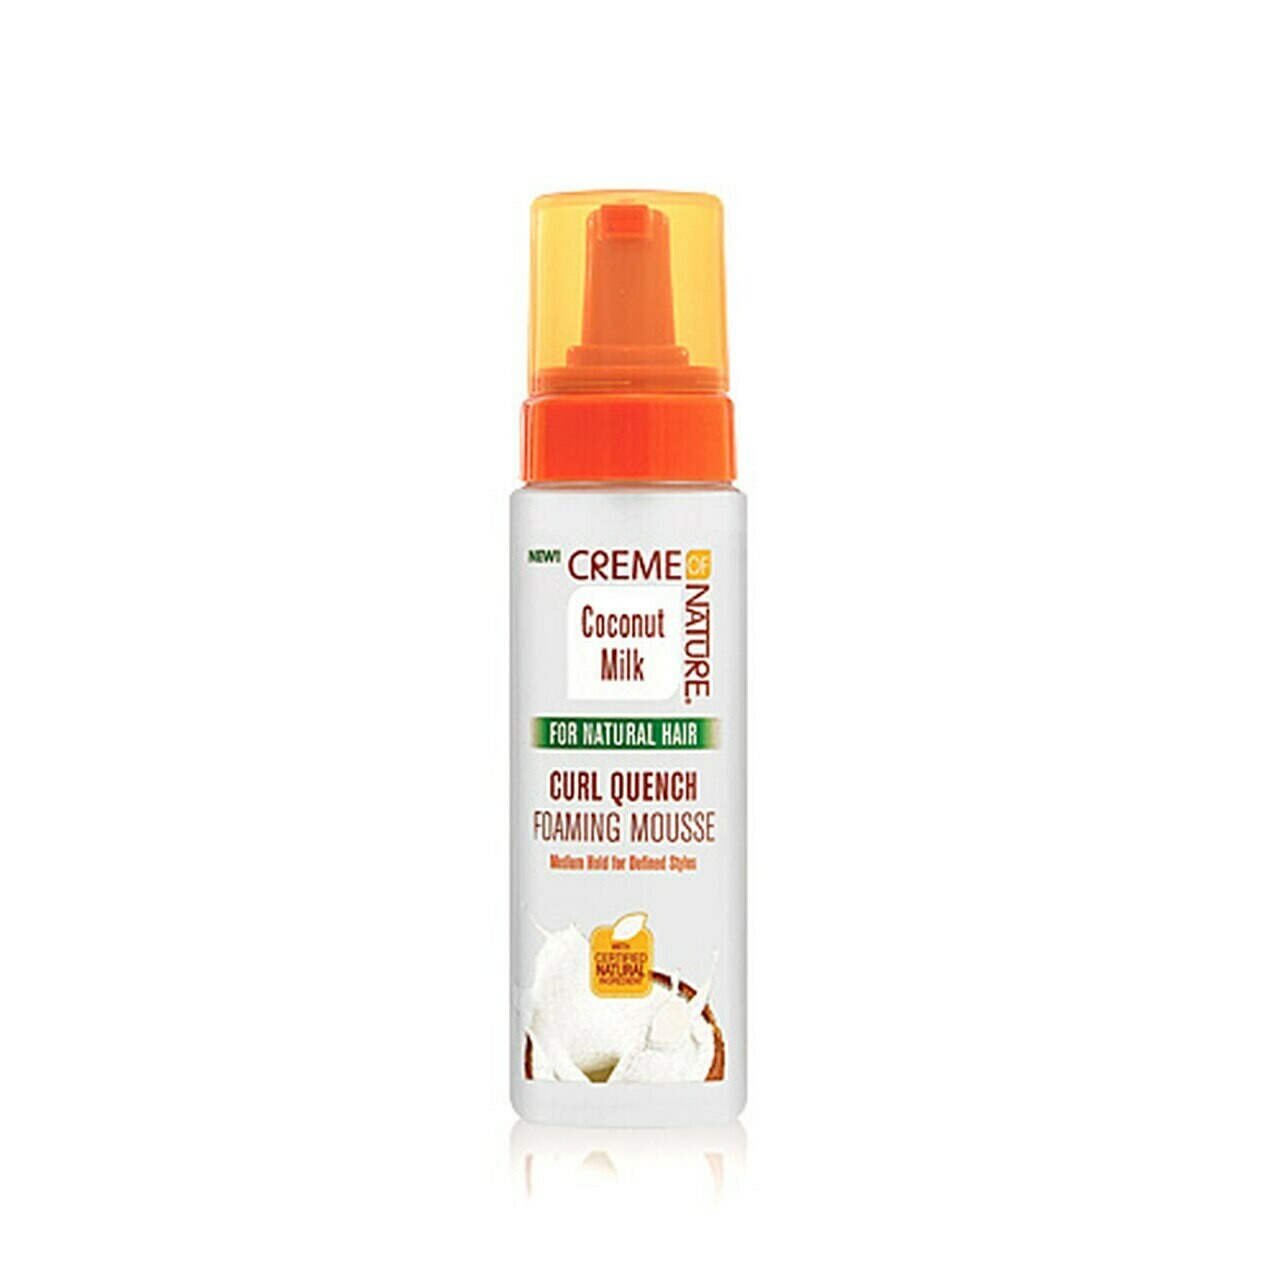 Creme Of Nature Coconut Milk Curl Quench Foaming Mousse 7oz